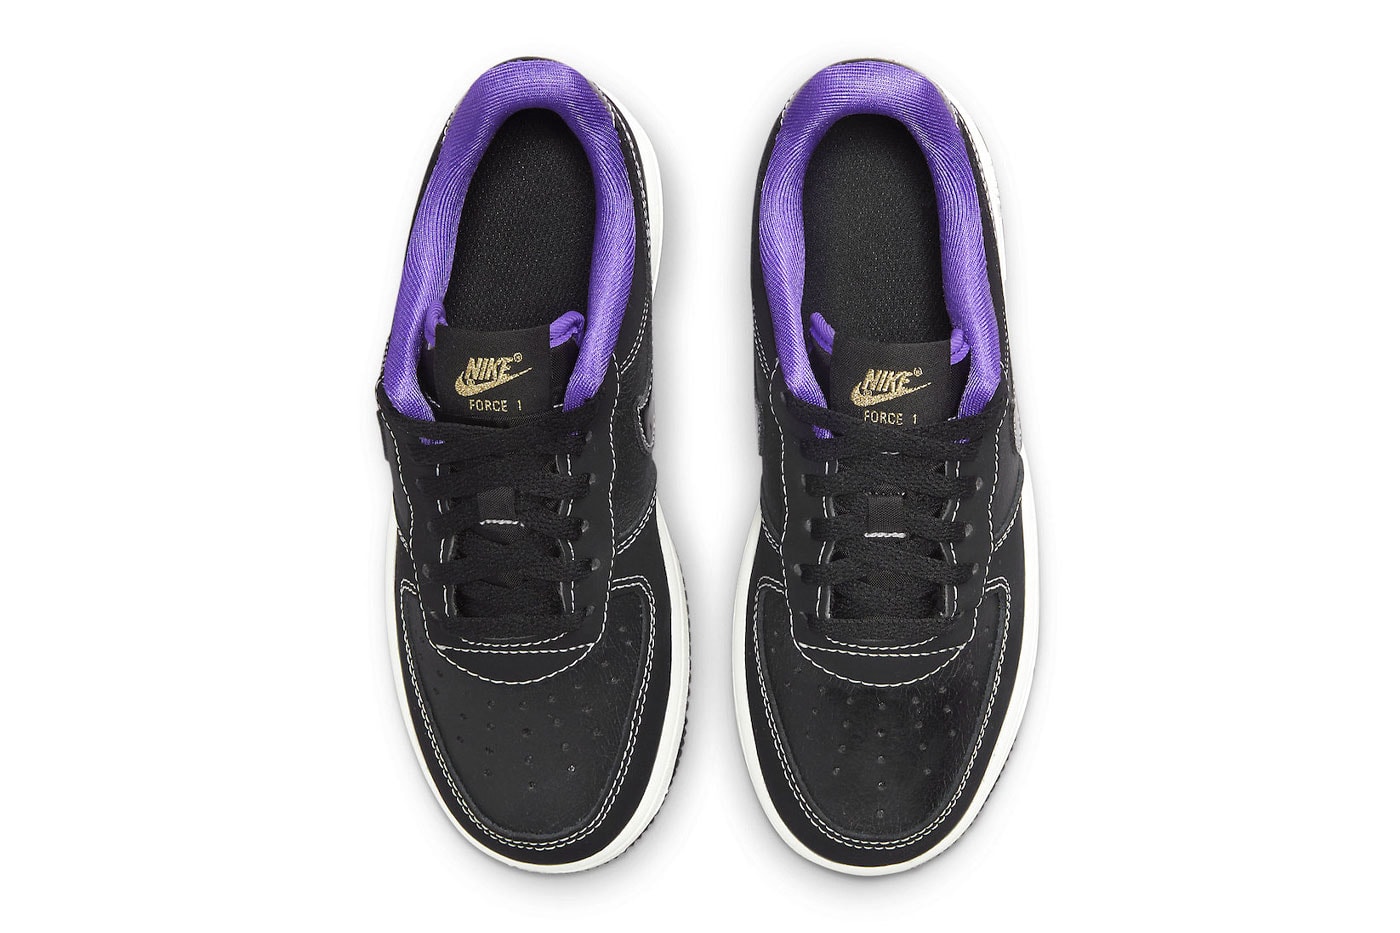 Nike Air Force 1 Low Drops in a "Lakers" Colorway DQ0301-001 los angeles lakers nubuck all-black leather anthony davis ad lebron james king james russell westbrook la